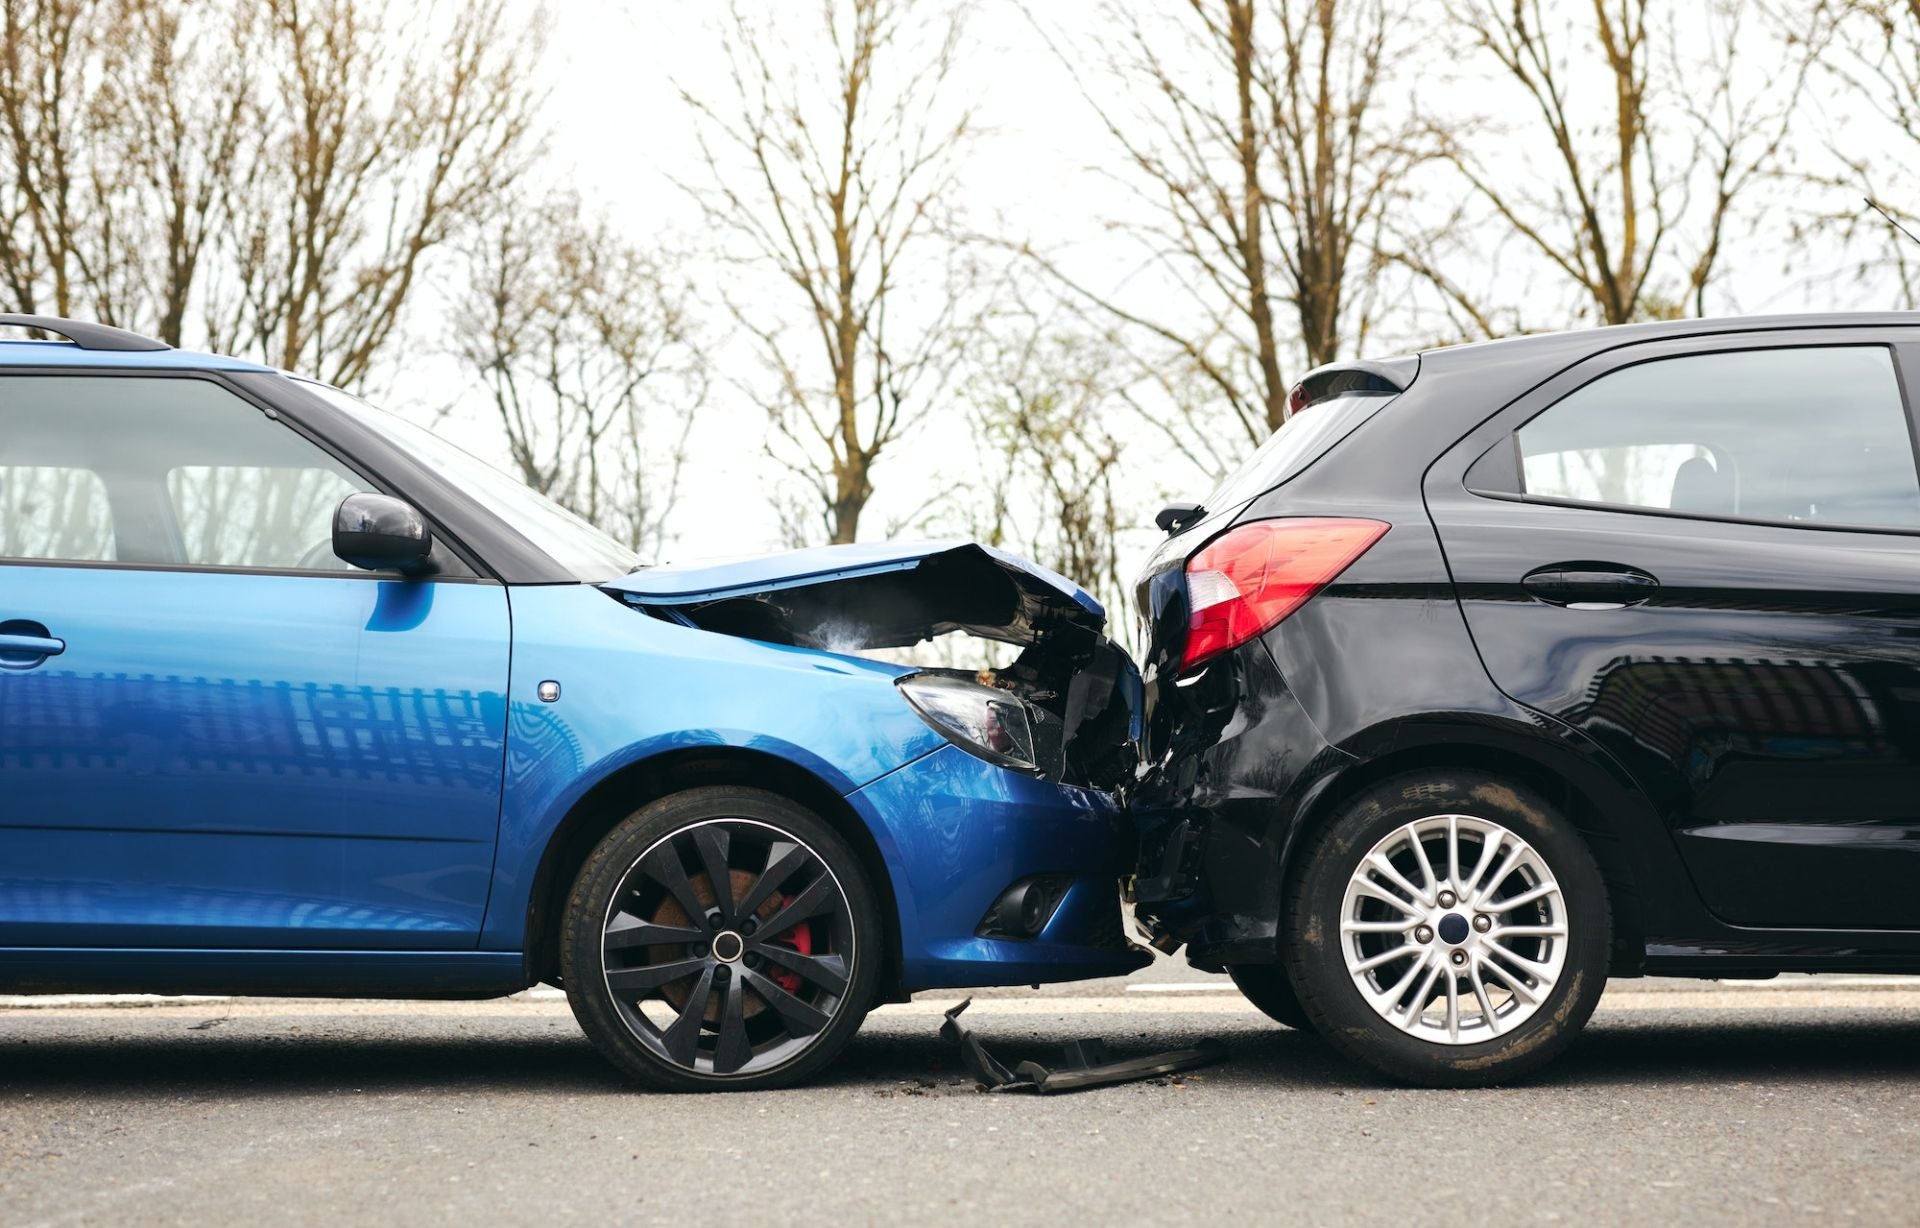 image of 2 cars in an accident